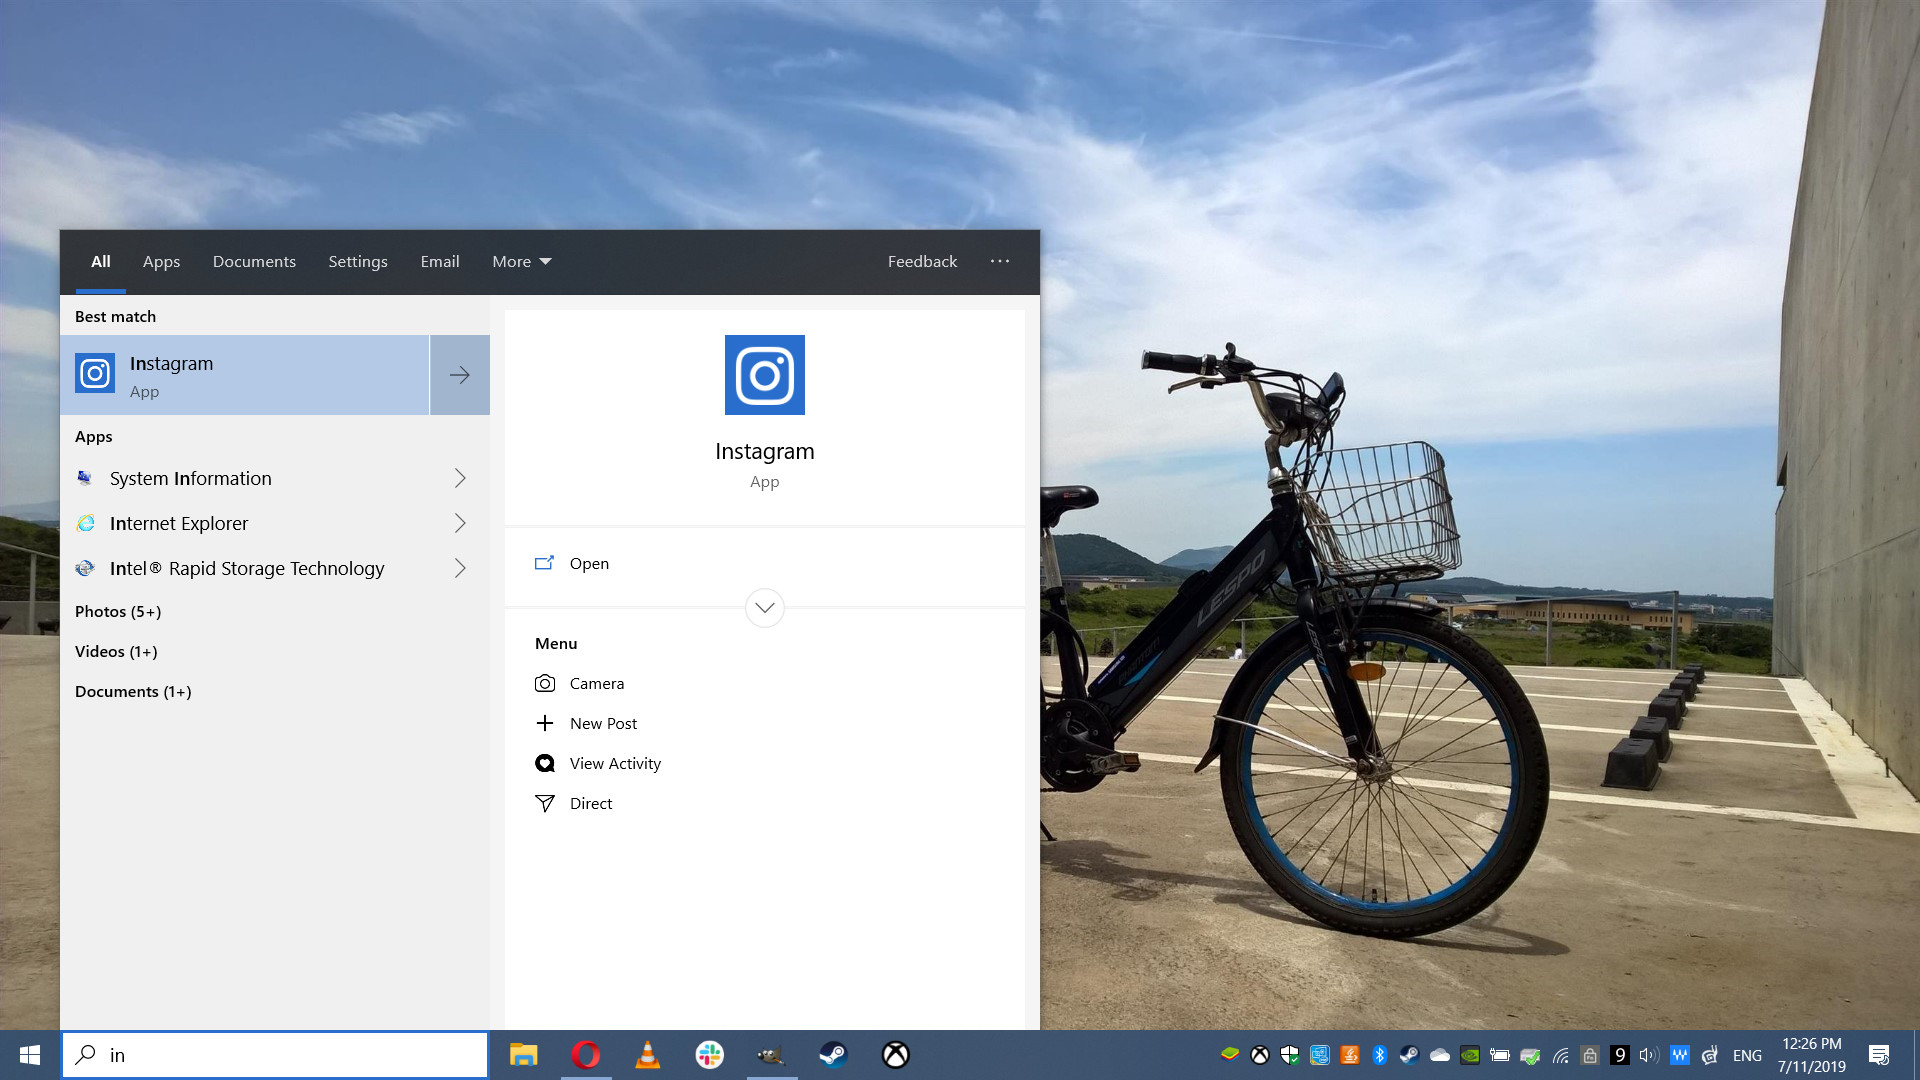 You can still upload photos to Instagram via the Windows 10 app. Just not from within the app.